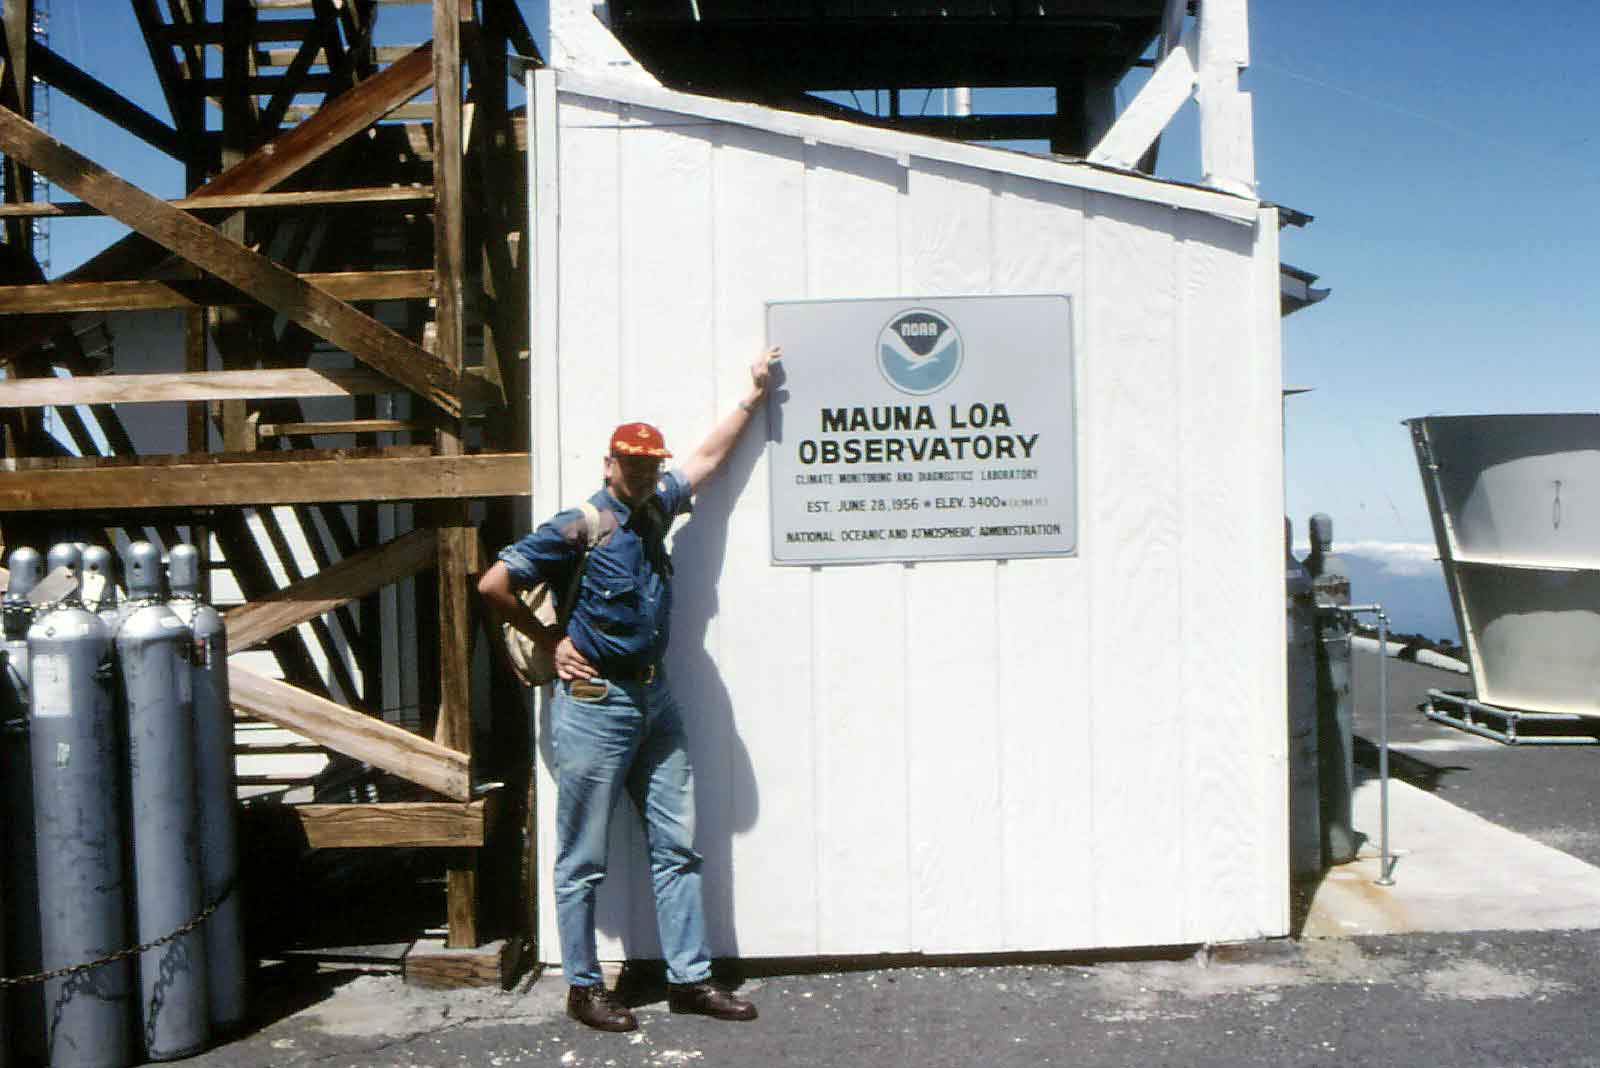 Download my abstract 'The amount of non-fossil CO2 in the atmosphere' (PDF; 33 kbytes). The photograph shows me at the Mauna Loa Observatory in Hawaii.